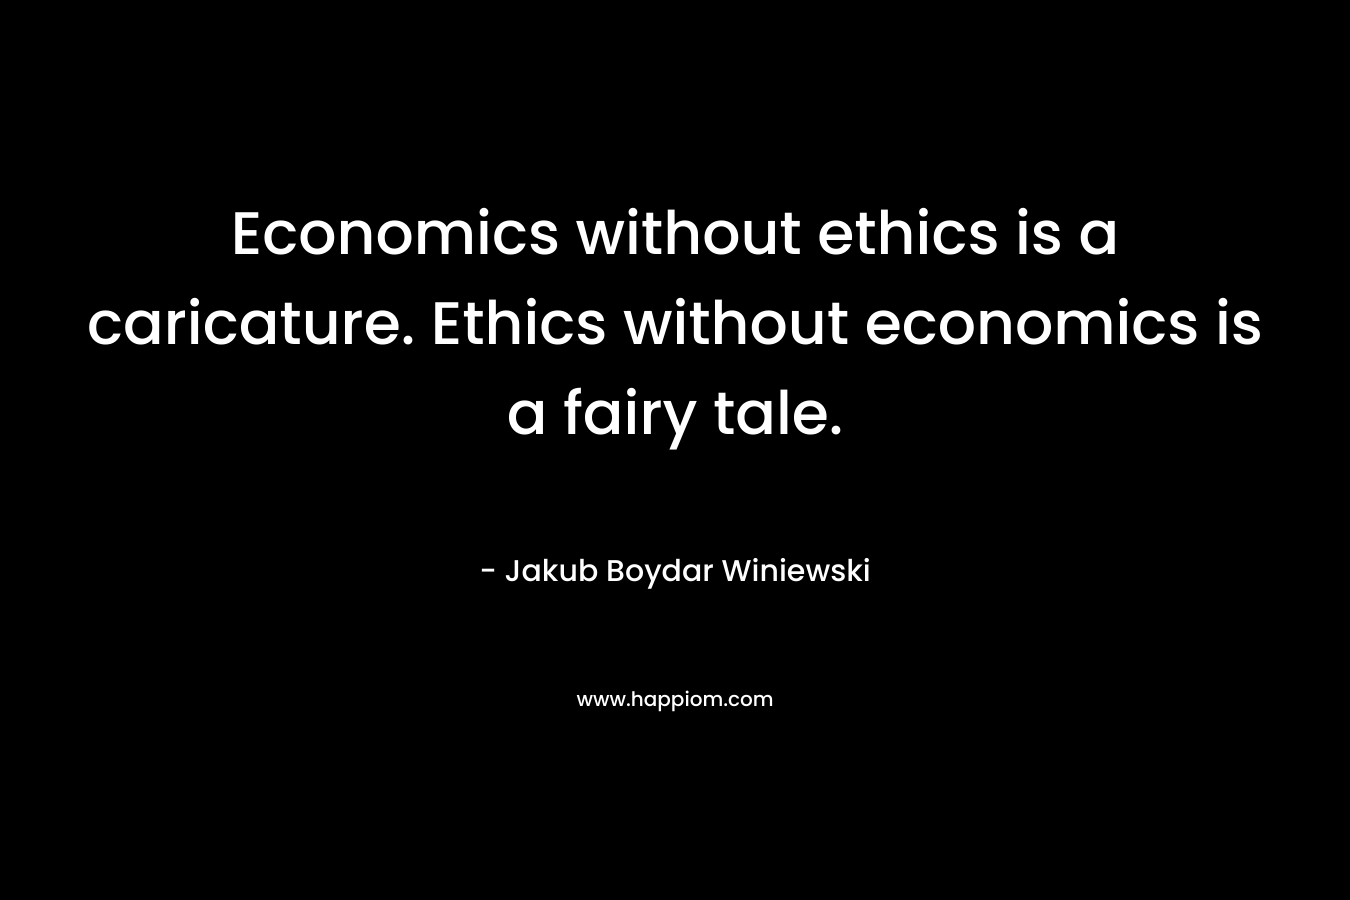 Economics without ethics is a caricature. Ethics without economics is a fairy tale. – Jakub Boydar Winiewski